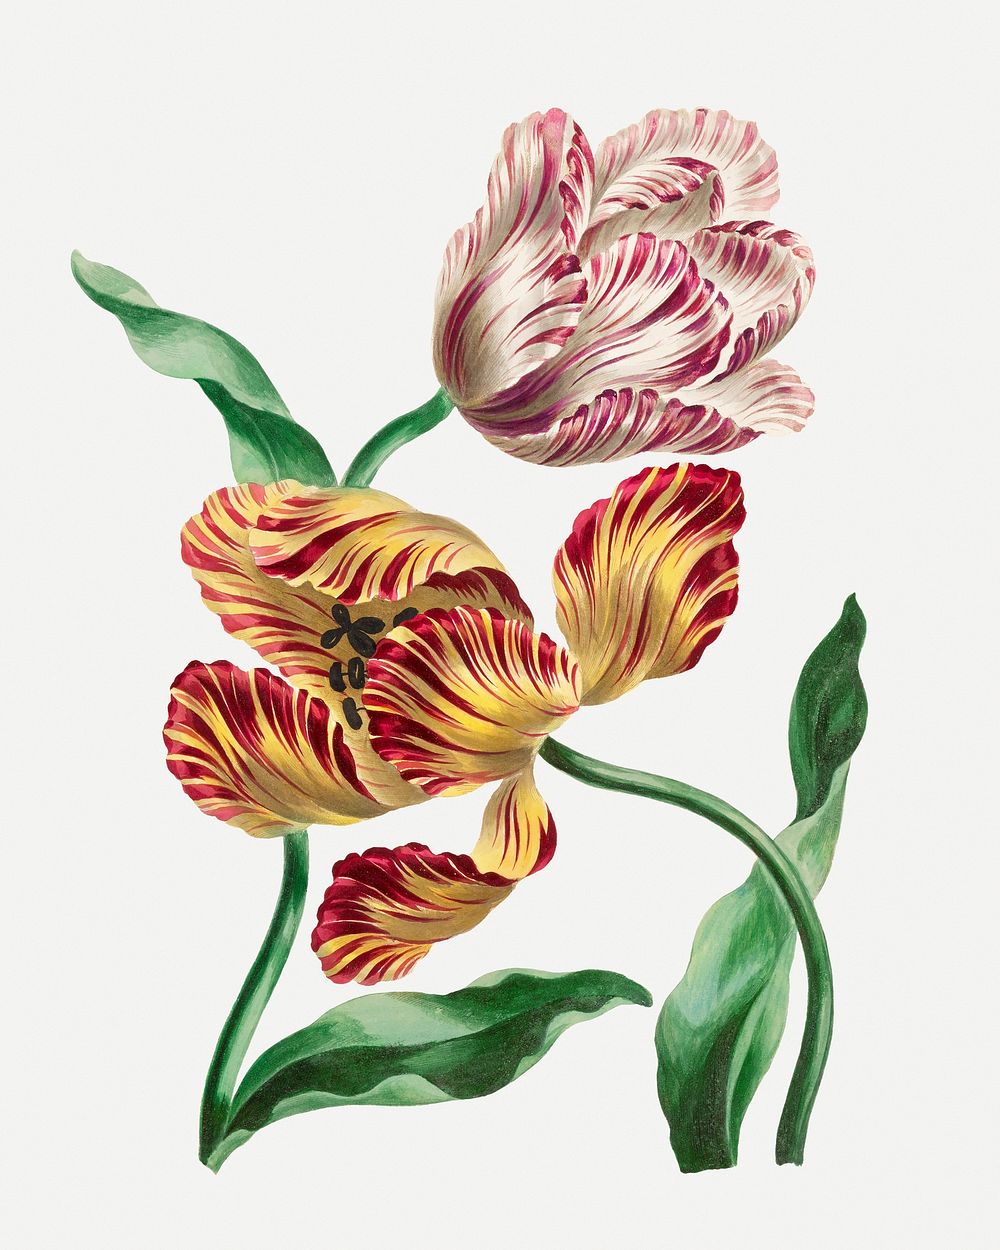 Vintage tulips floral art print, remixed from artworks by John Edwards